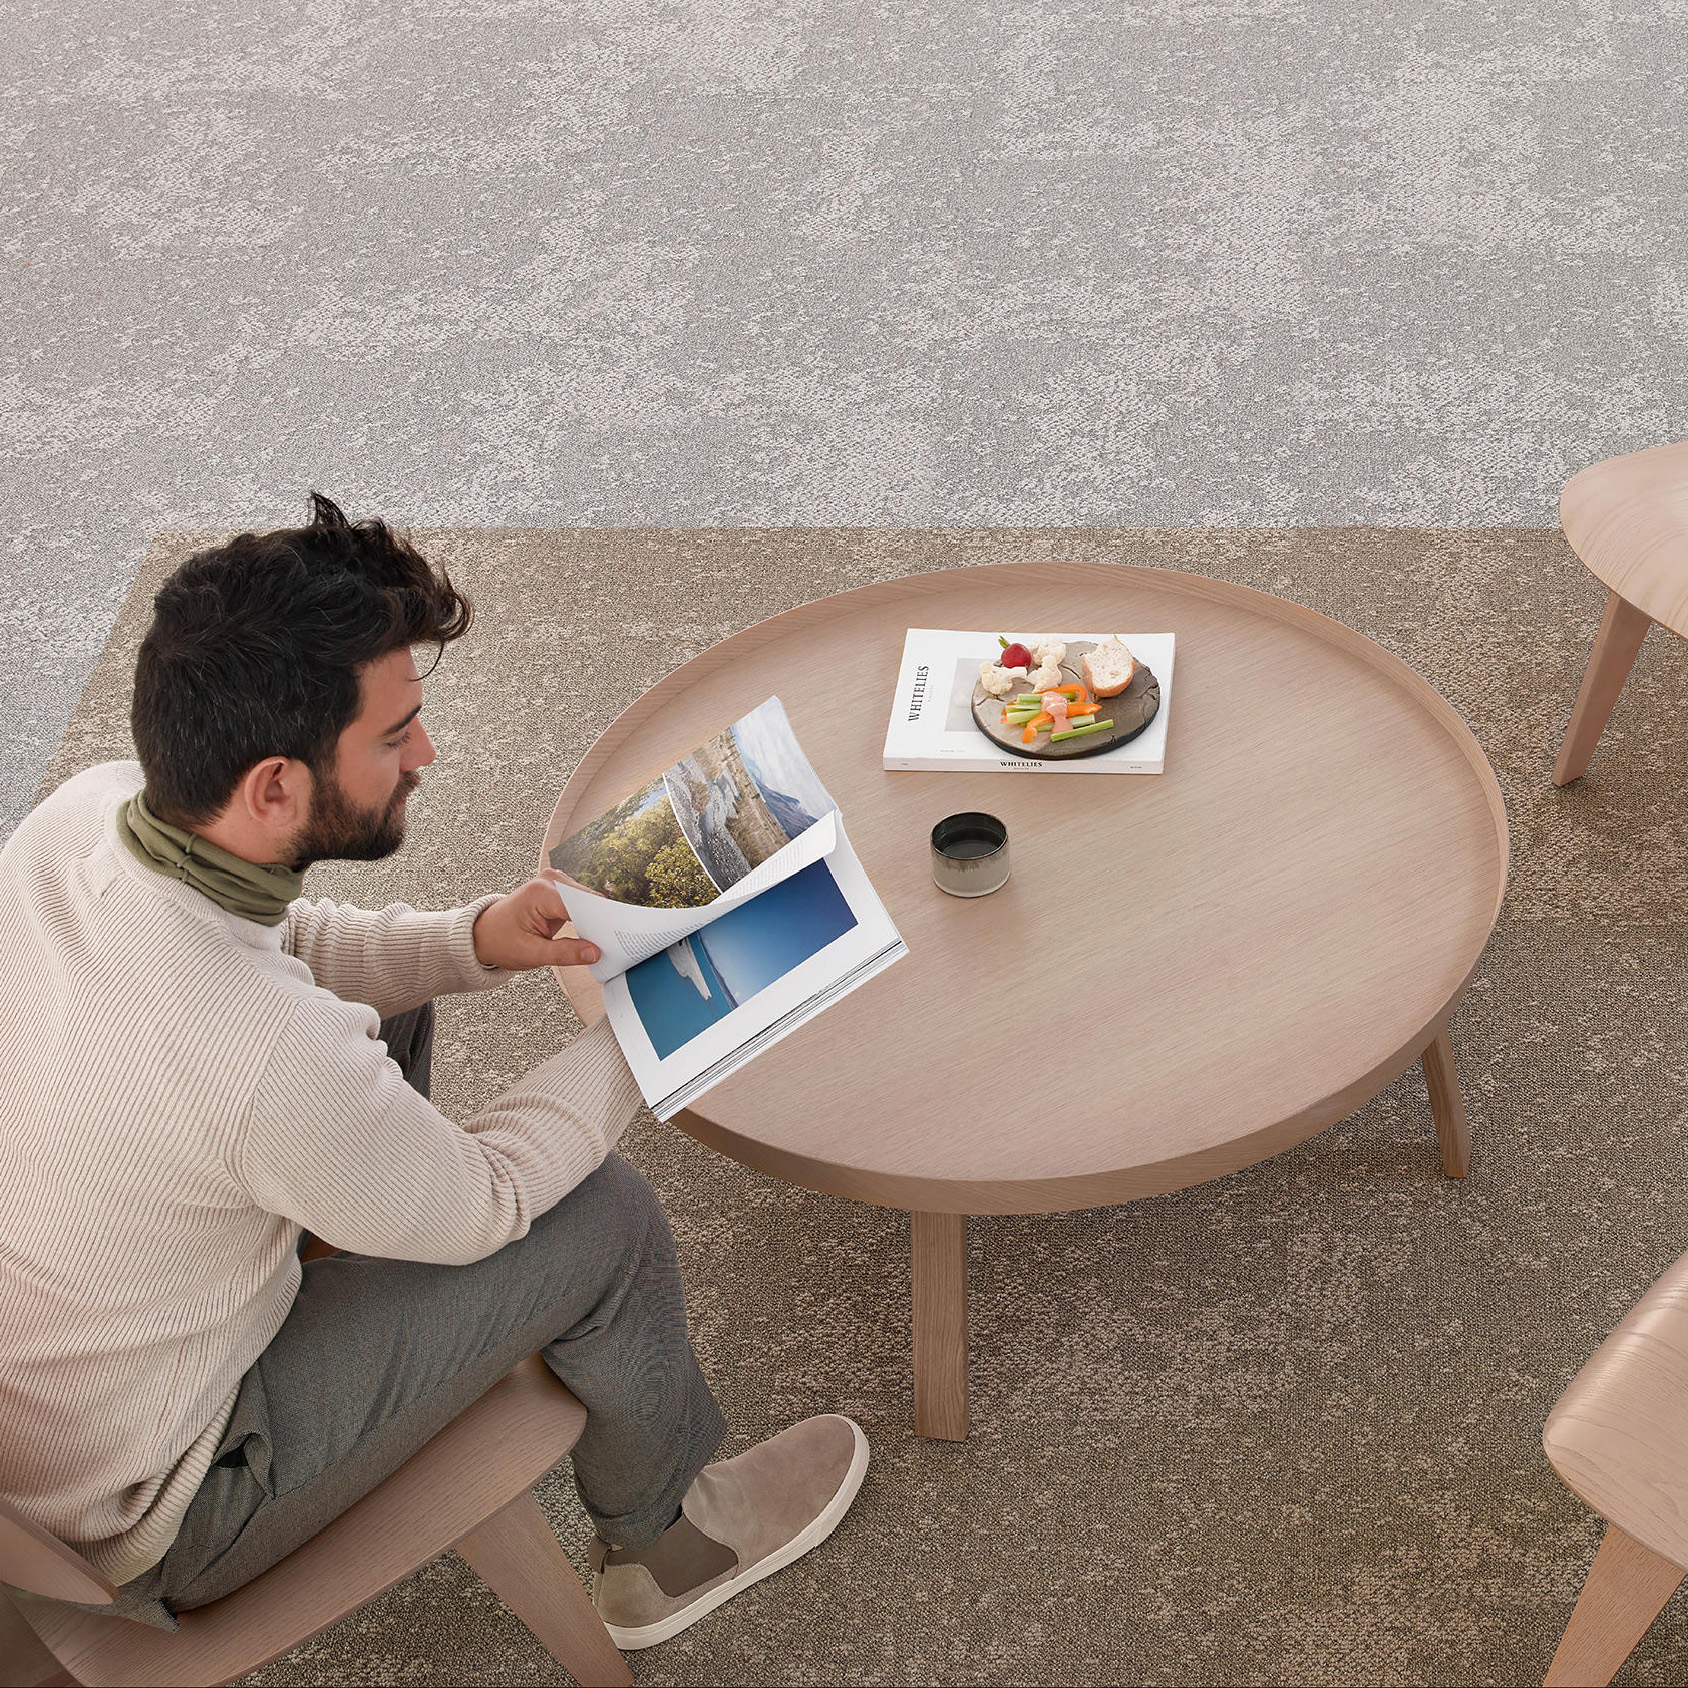 Desso Arable Carpet Tiles with man sitting at table reading